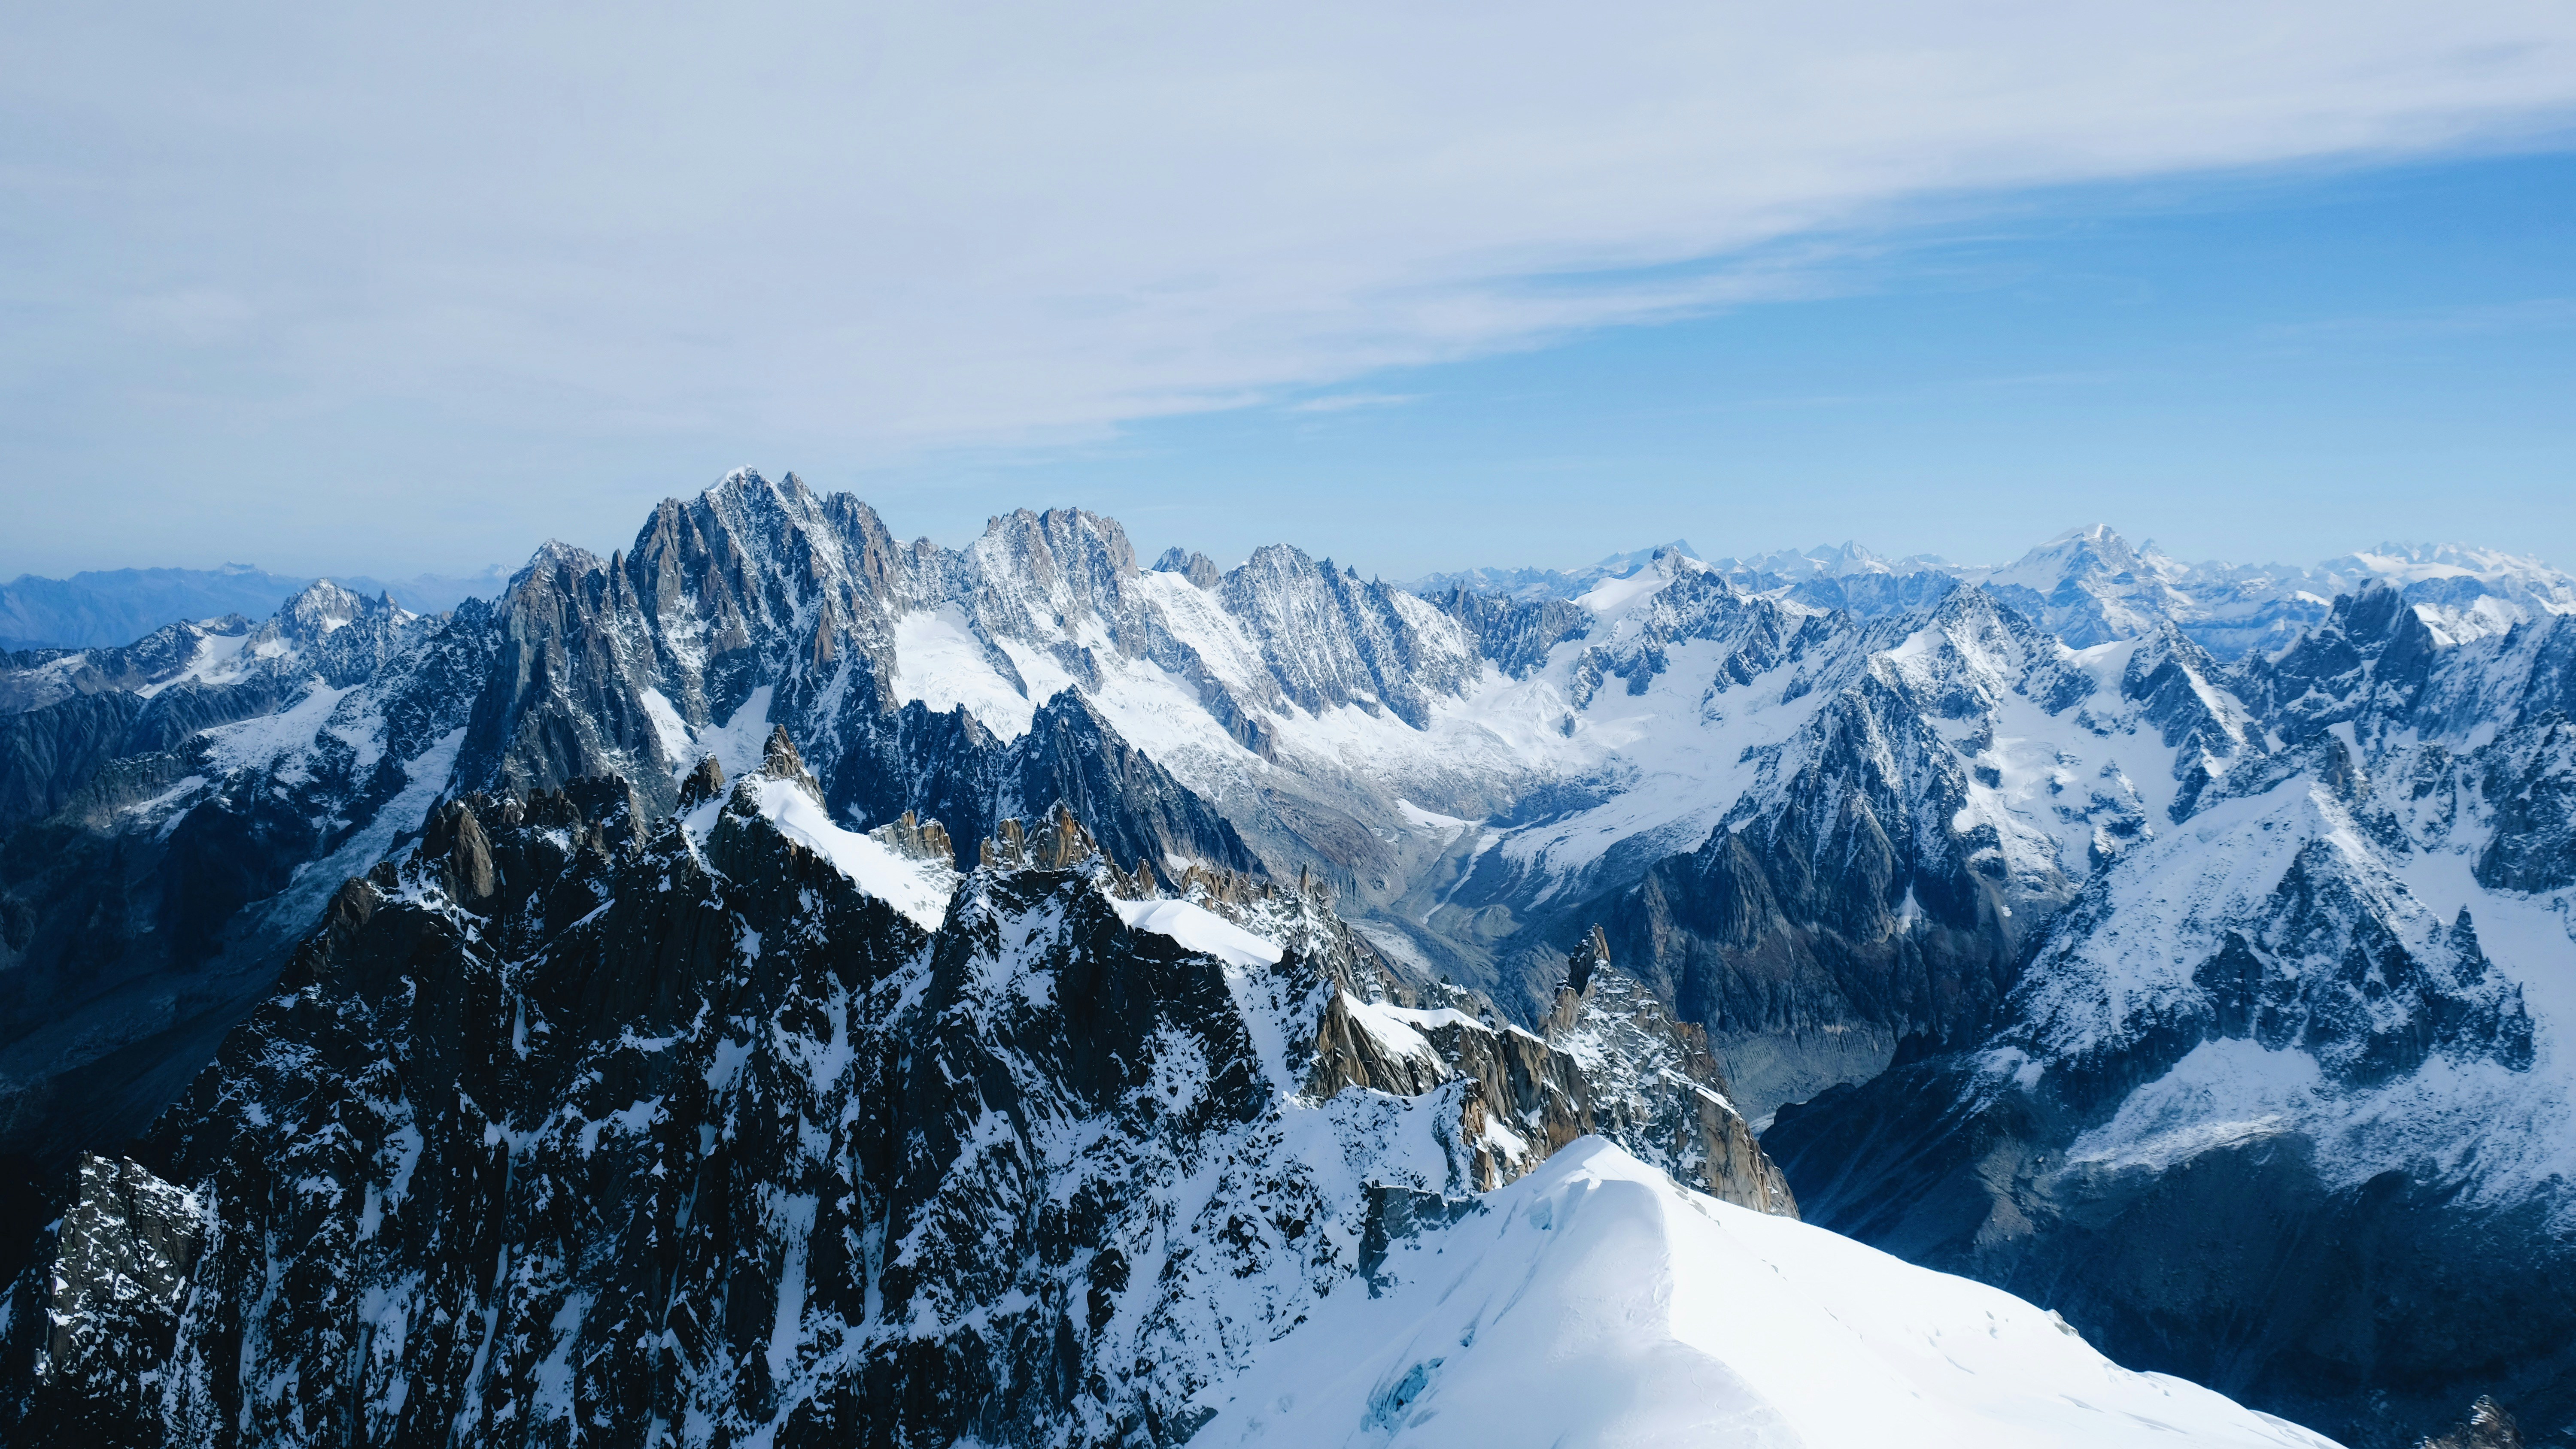 Shot at an altitude of 12 602 ft on top of the ‘Aiguille du Midi’